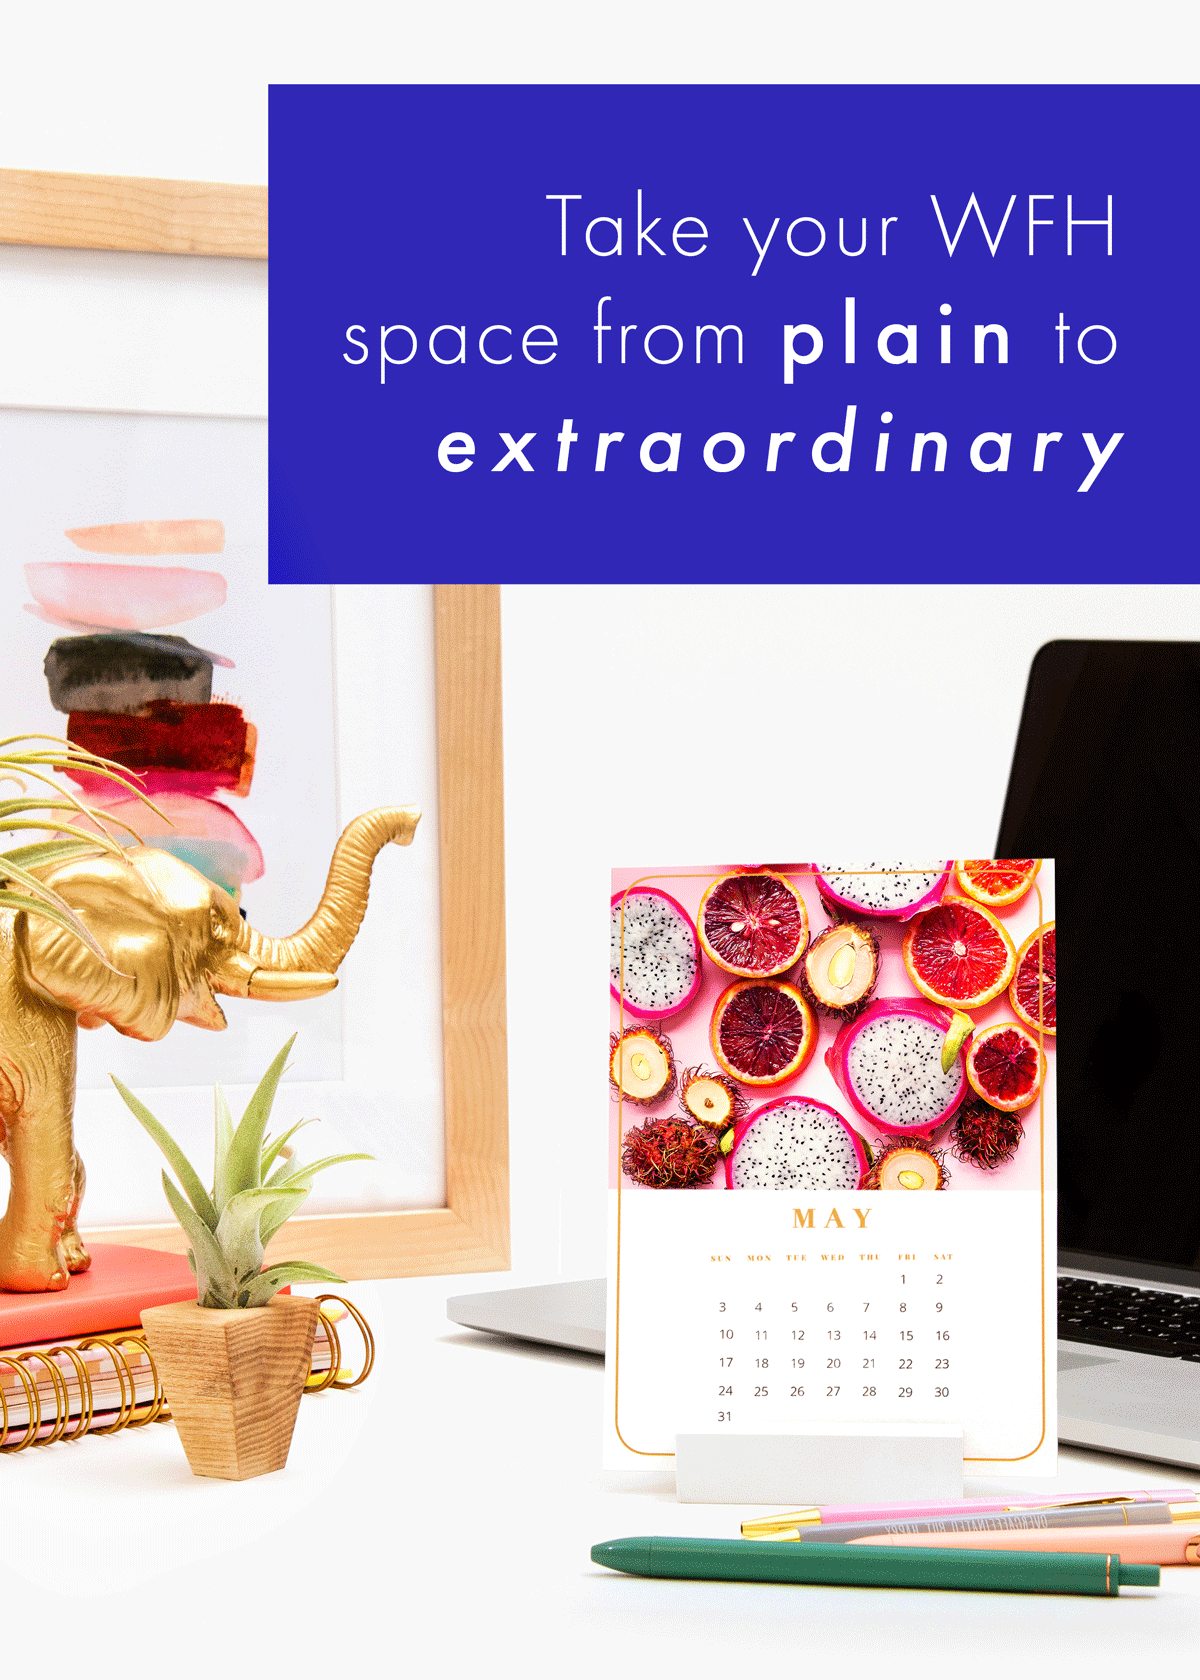 Take your WFH space from plain to extraordinary